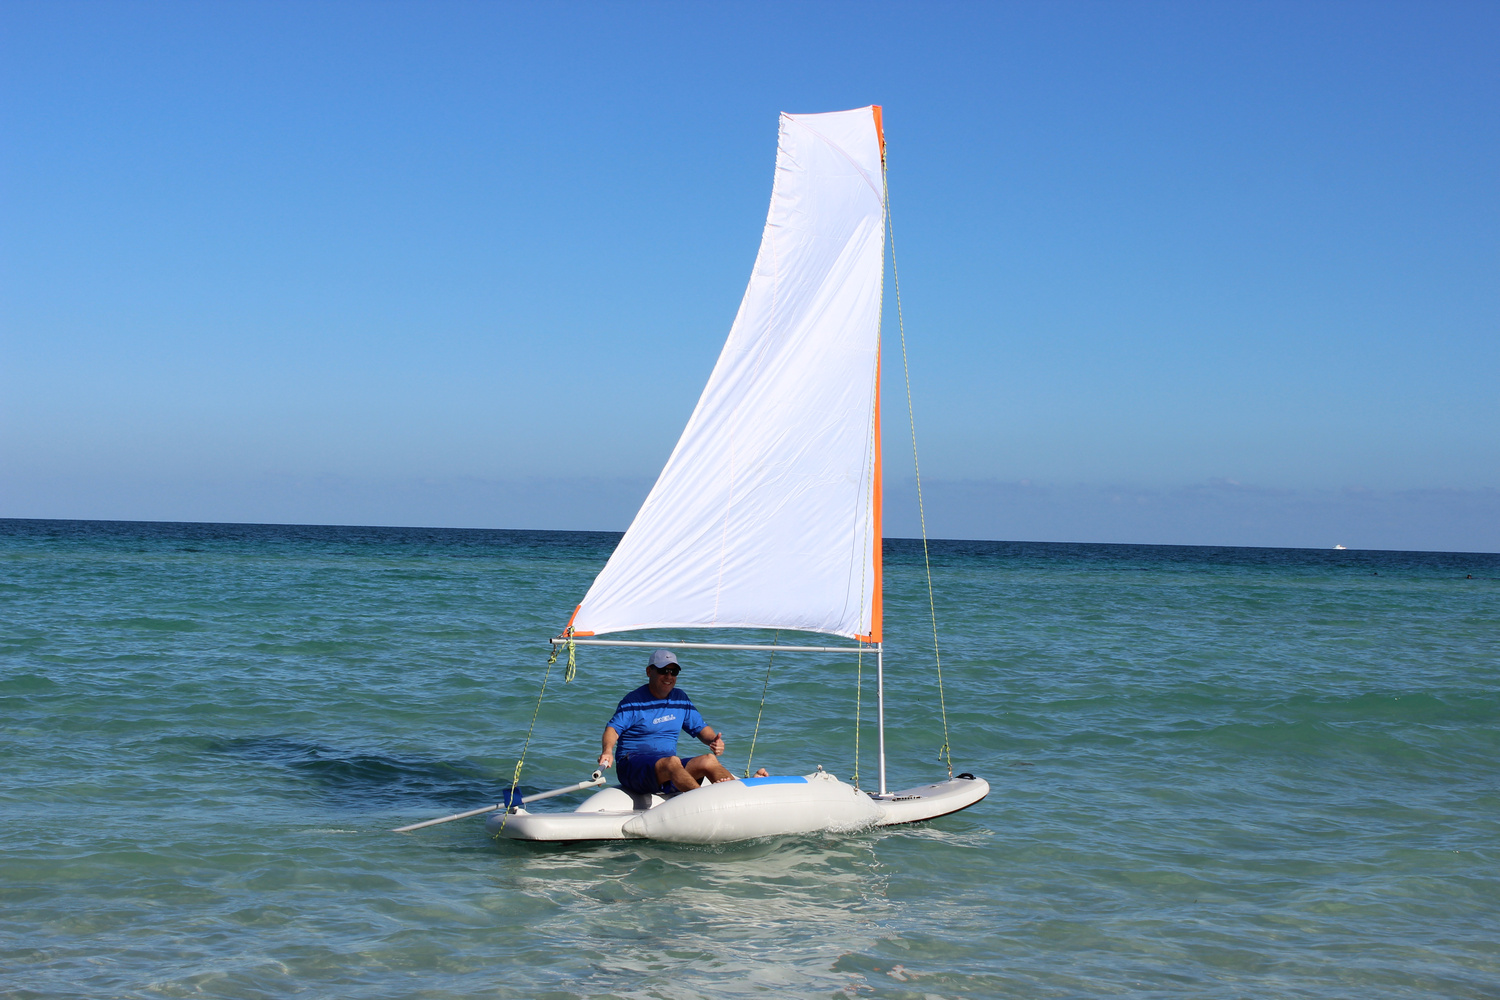 New Sail kit V2.0 installed on small inflatable sail board. Click to 